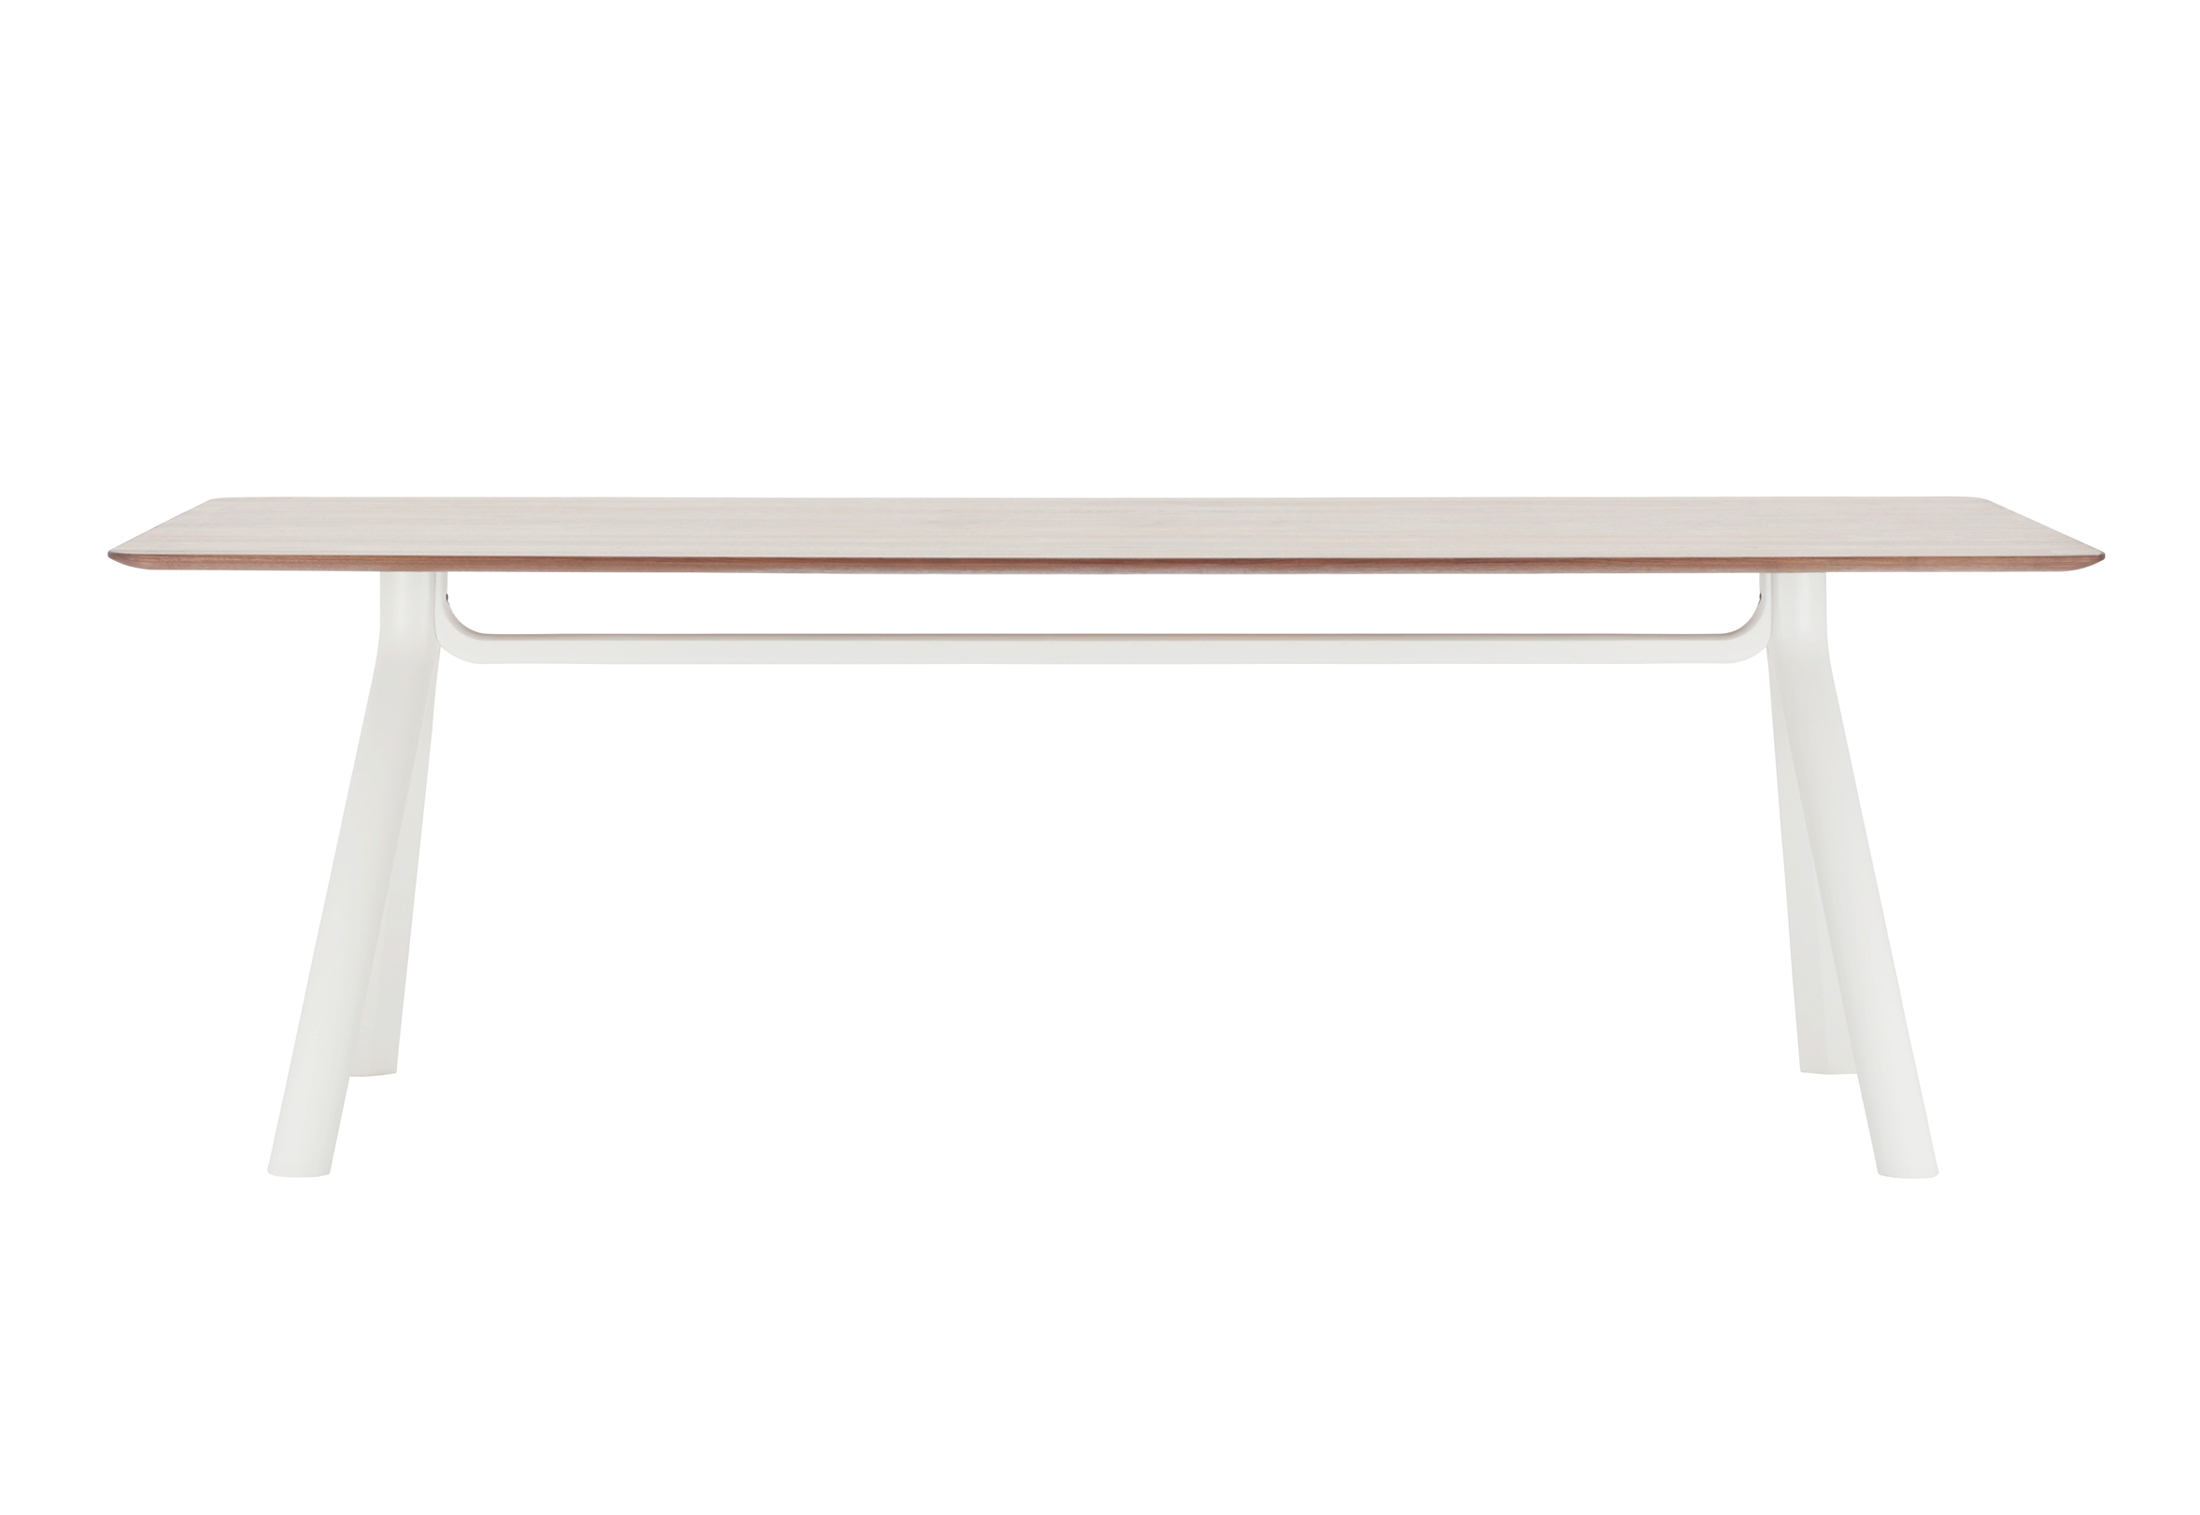 1060 Table by Jorre van Ast for Thonet